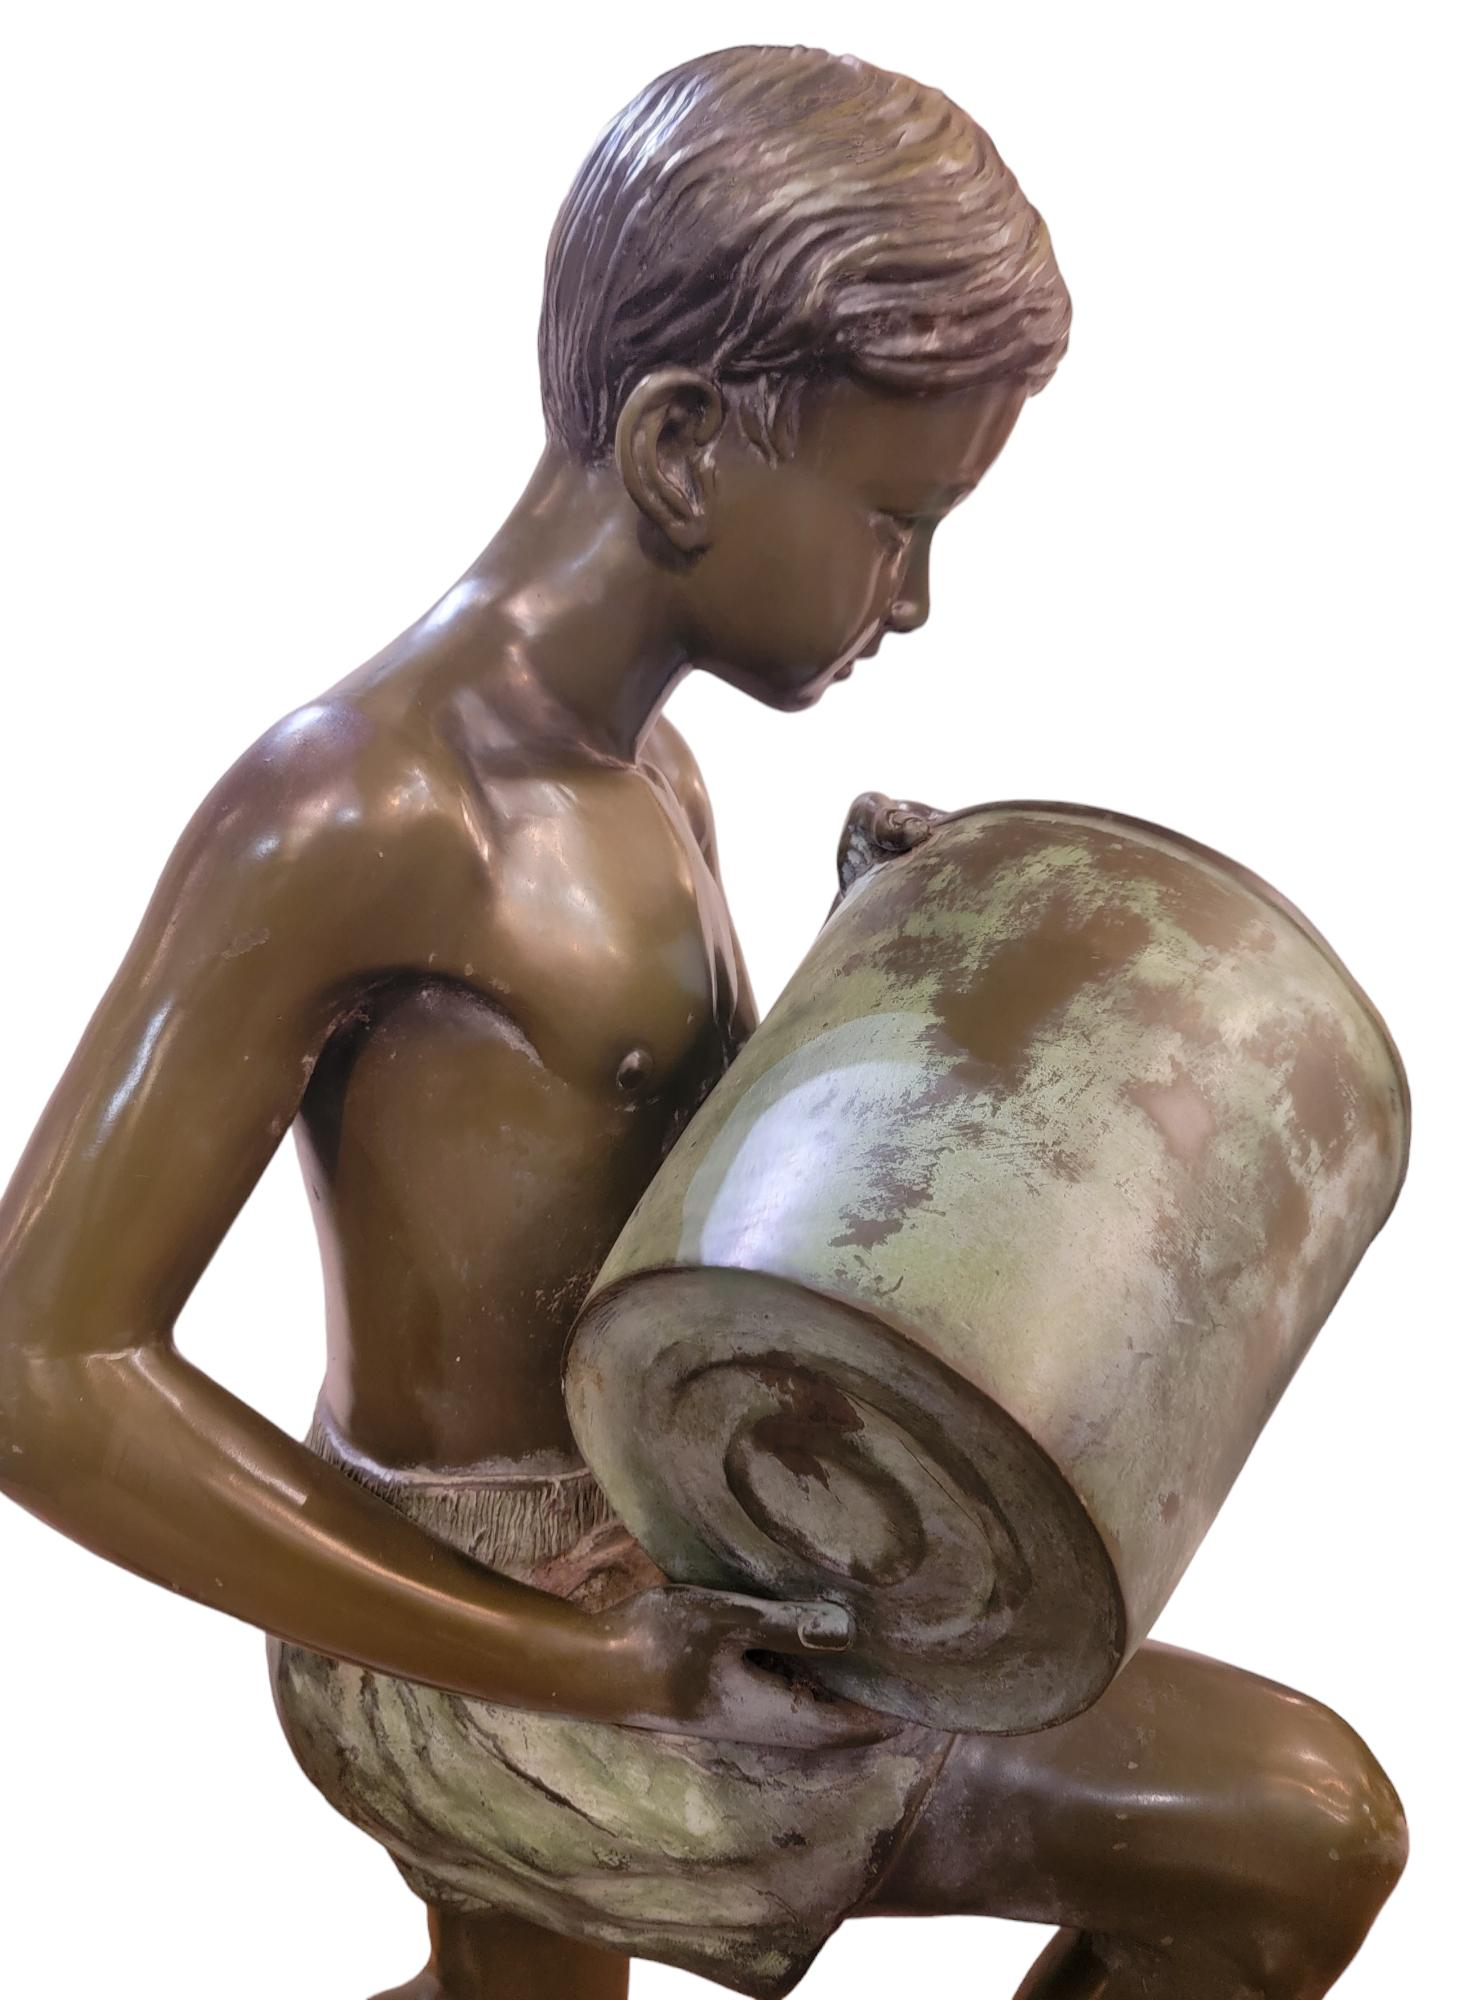 1940-50s kneeling bronze boy sculpture of boy holding a bucket. This sculpture Has amazing color and patina to the boy. 
Strong life sized sculpture. 